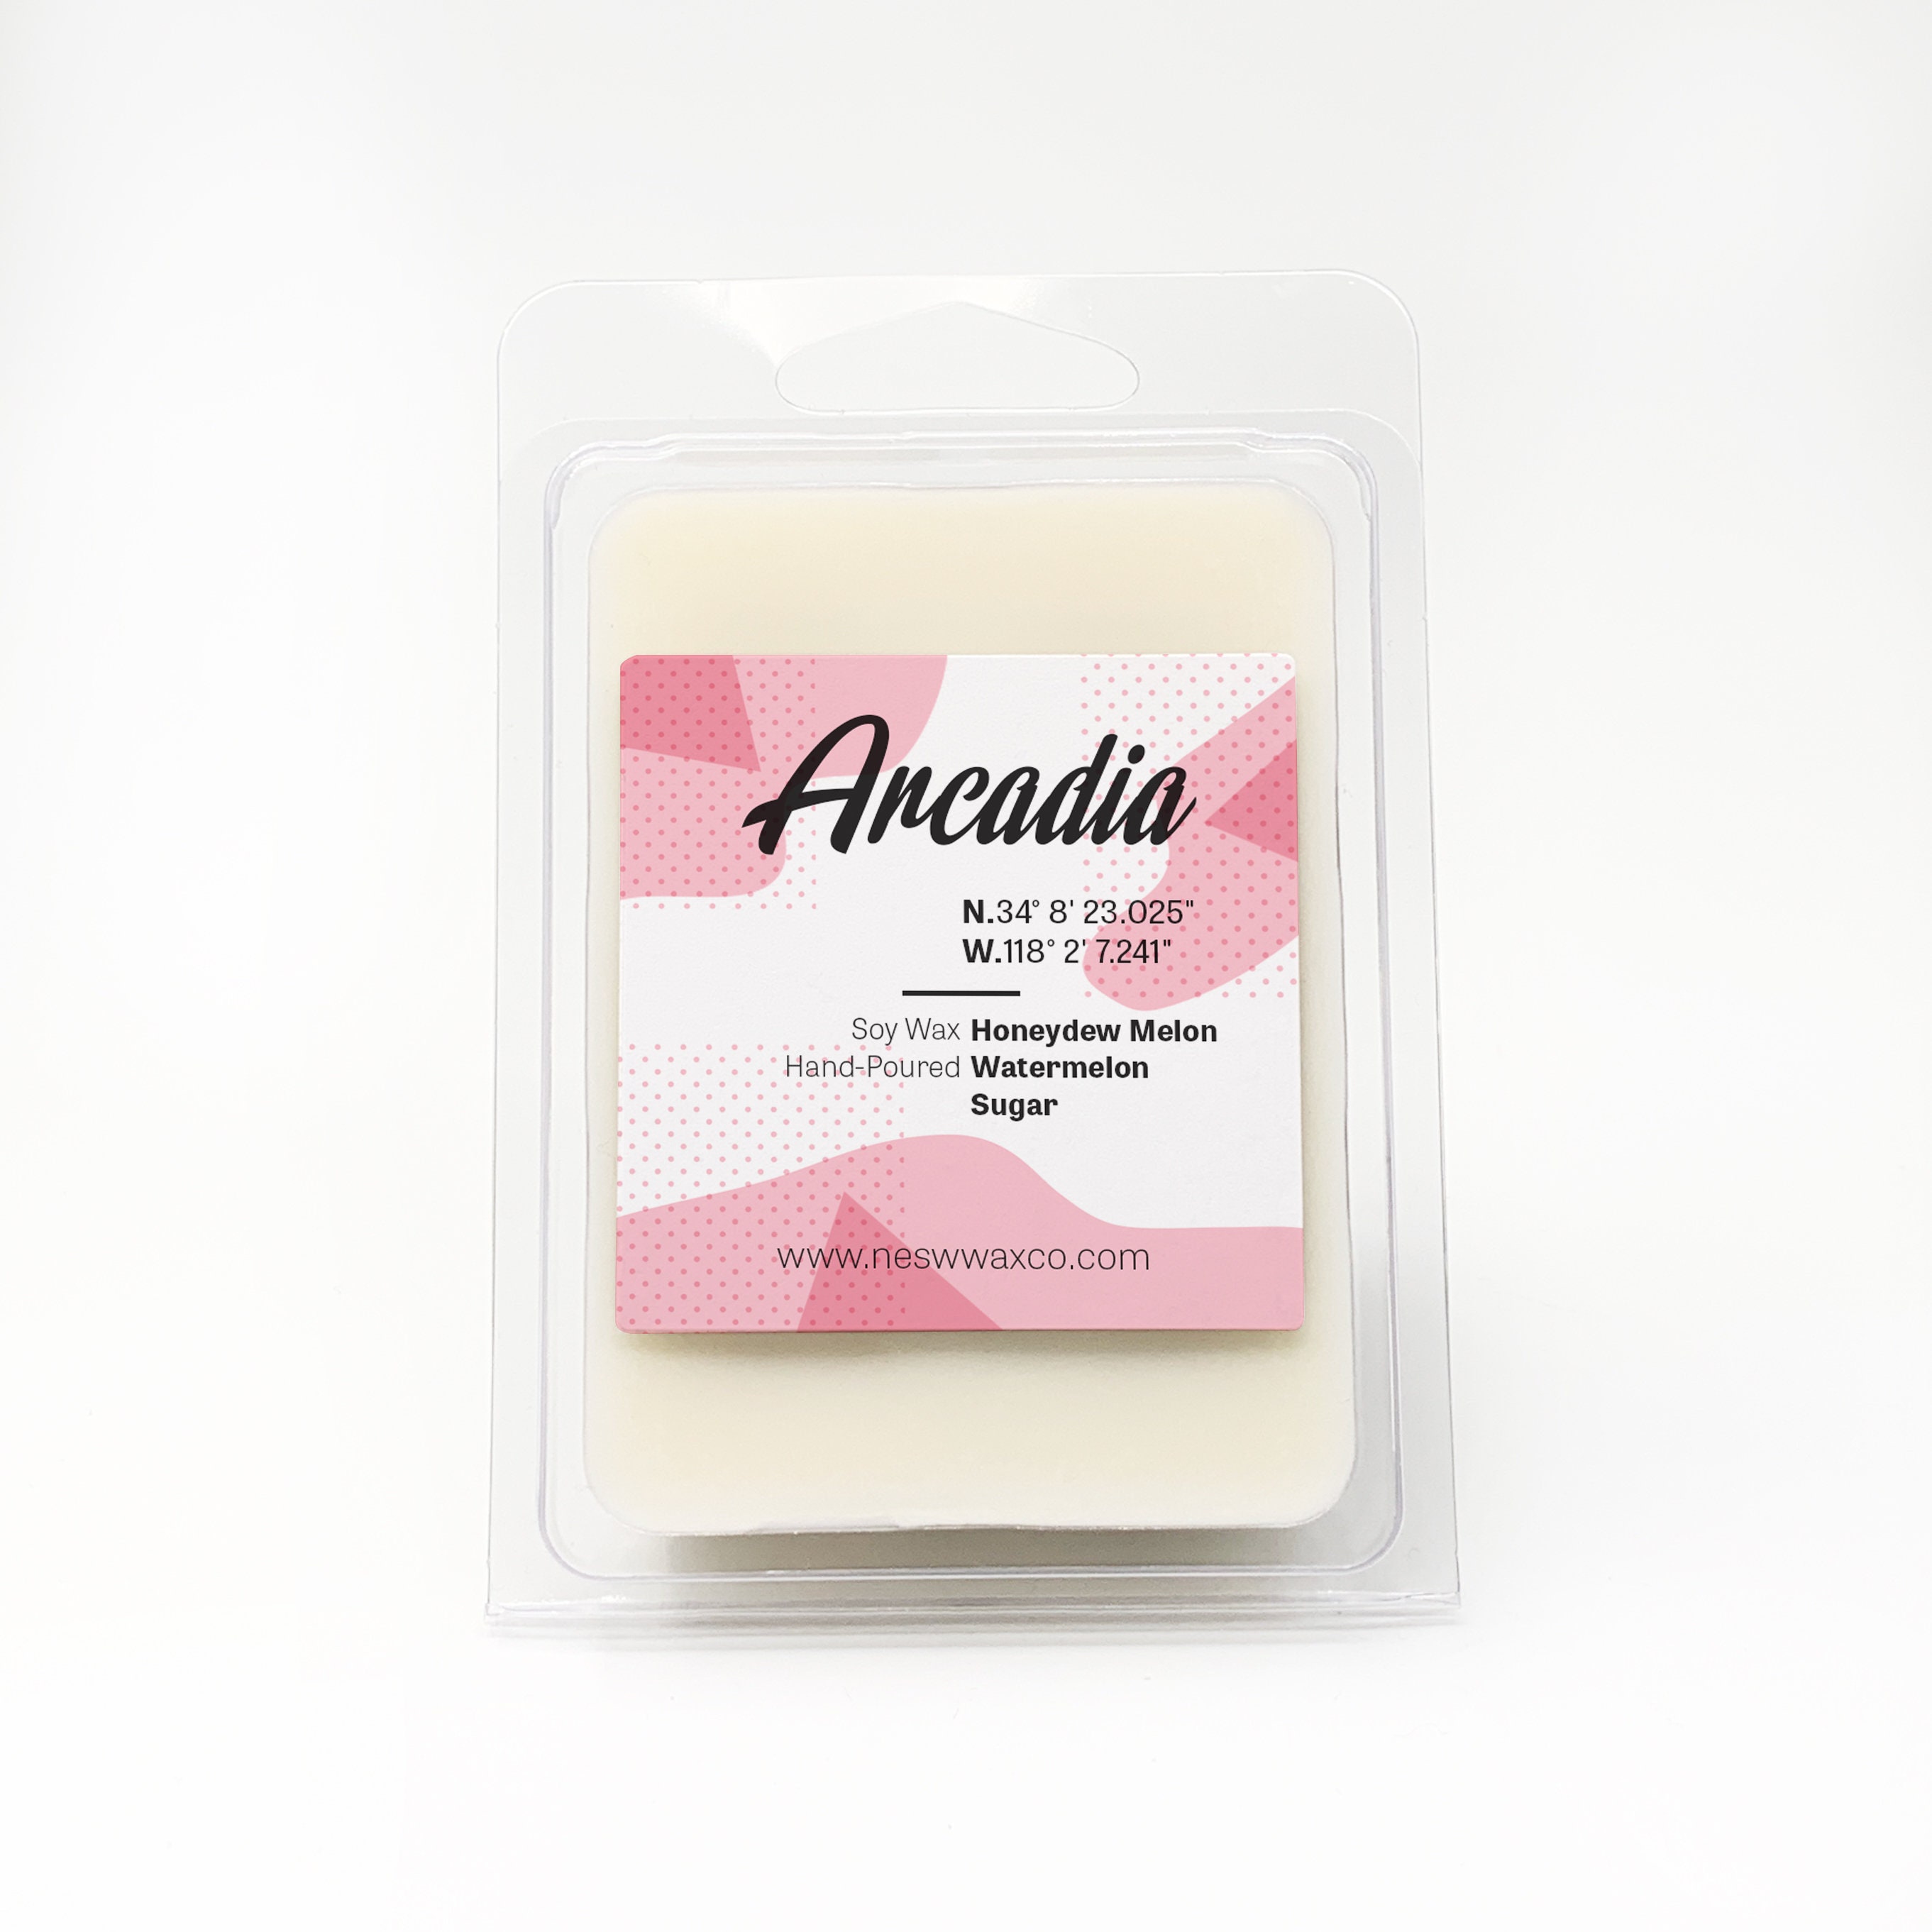 Han Crafted It - Pink sands soy wax melts - Reminiscent of